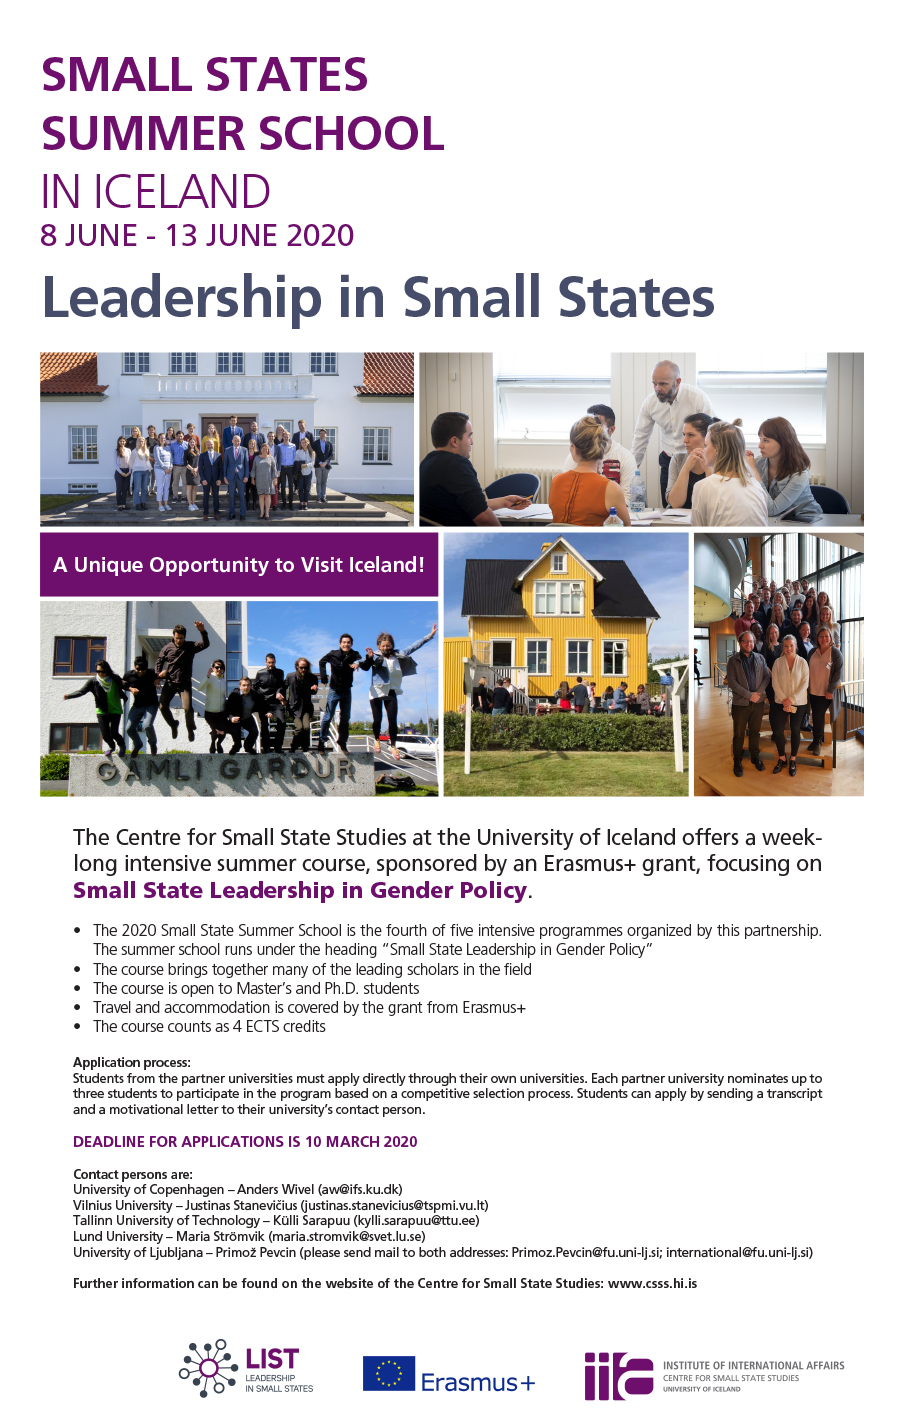 Participate in the Small States Summer School in Iceland!